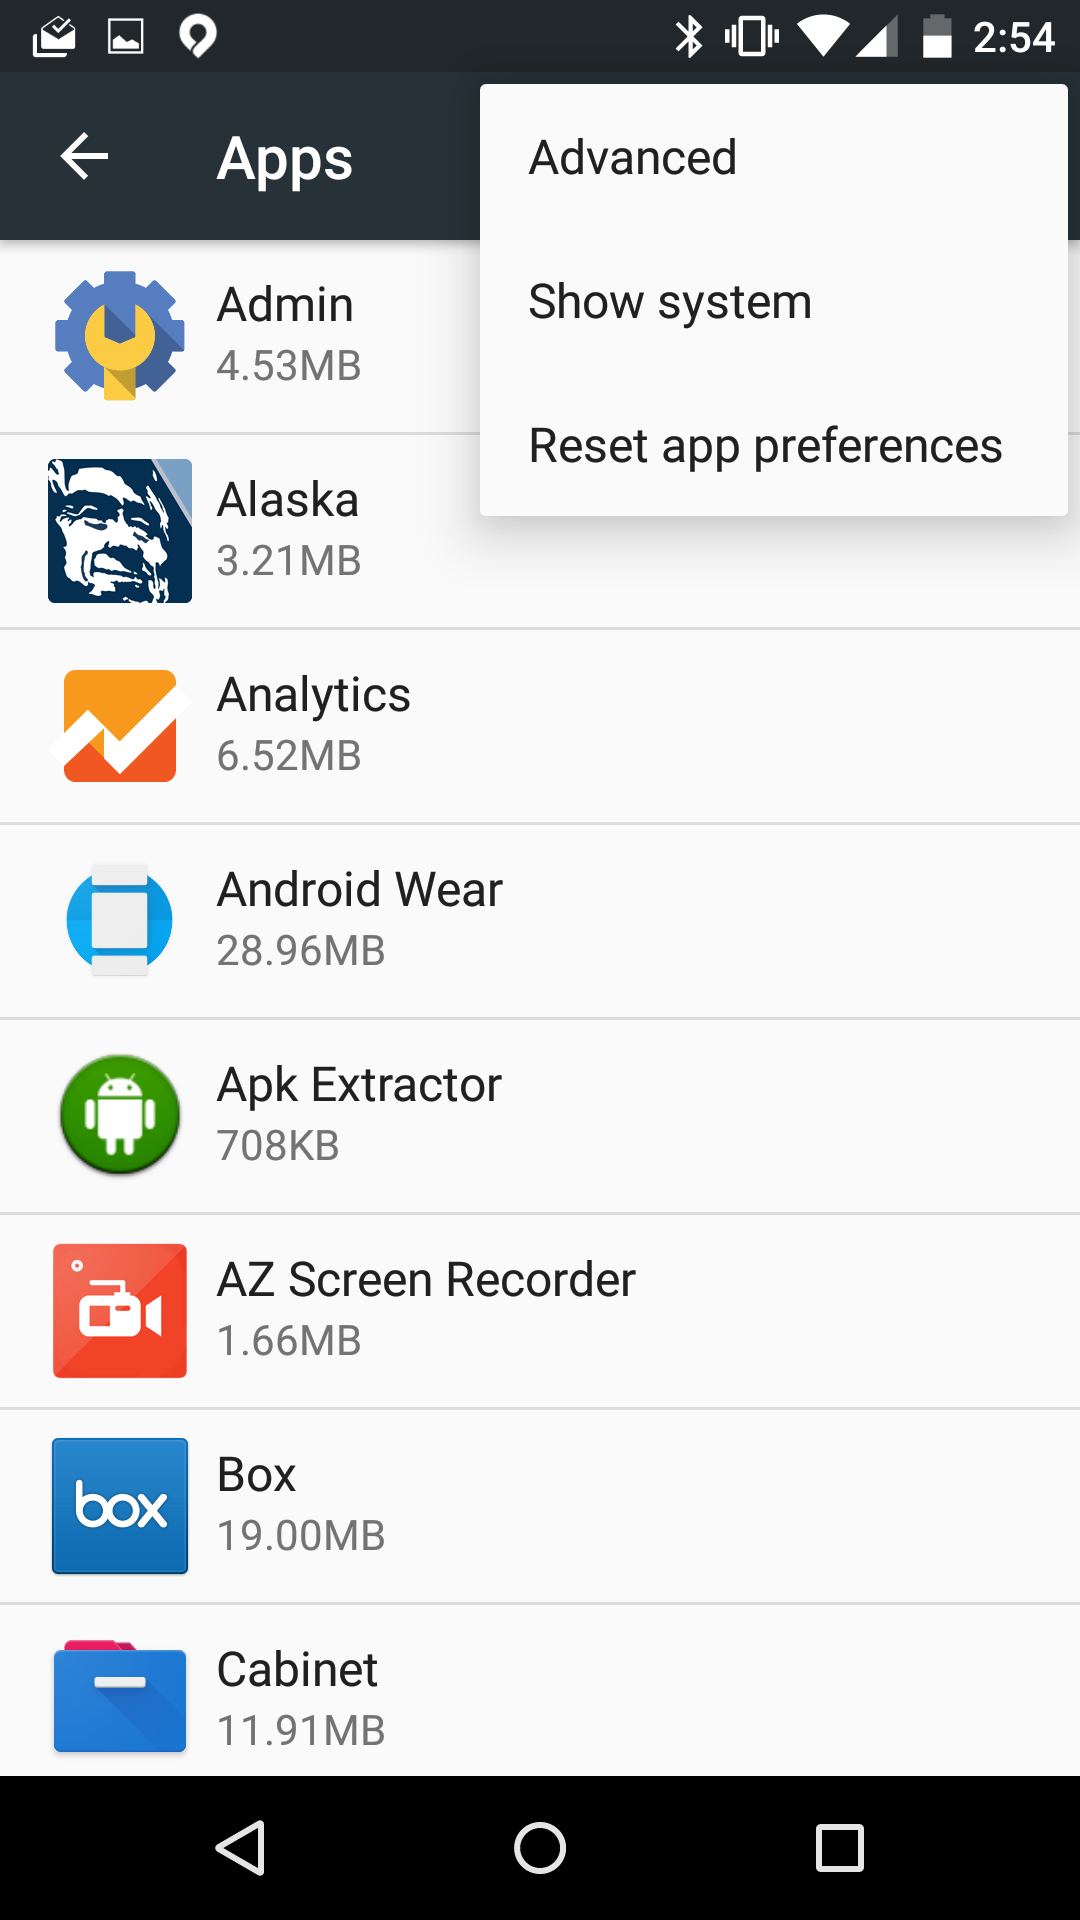 lav lektier Tilbageholdenhed retfærdig Android M Feature: Apps Manager is Simpler, Yet Insanely More Powerful